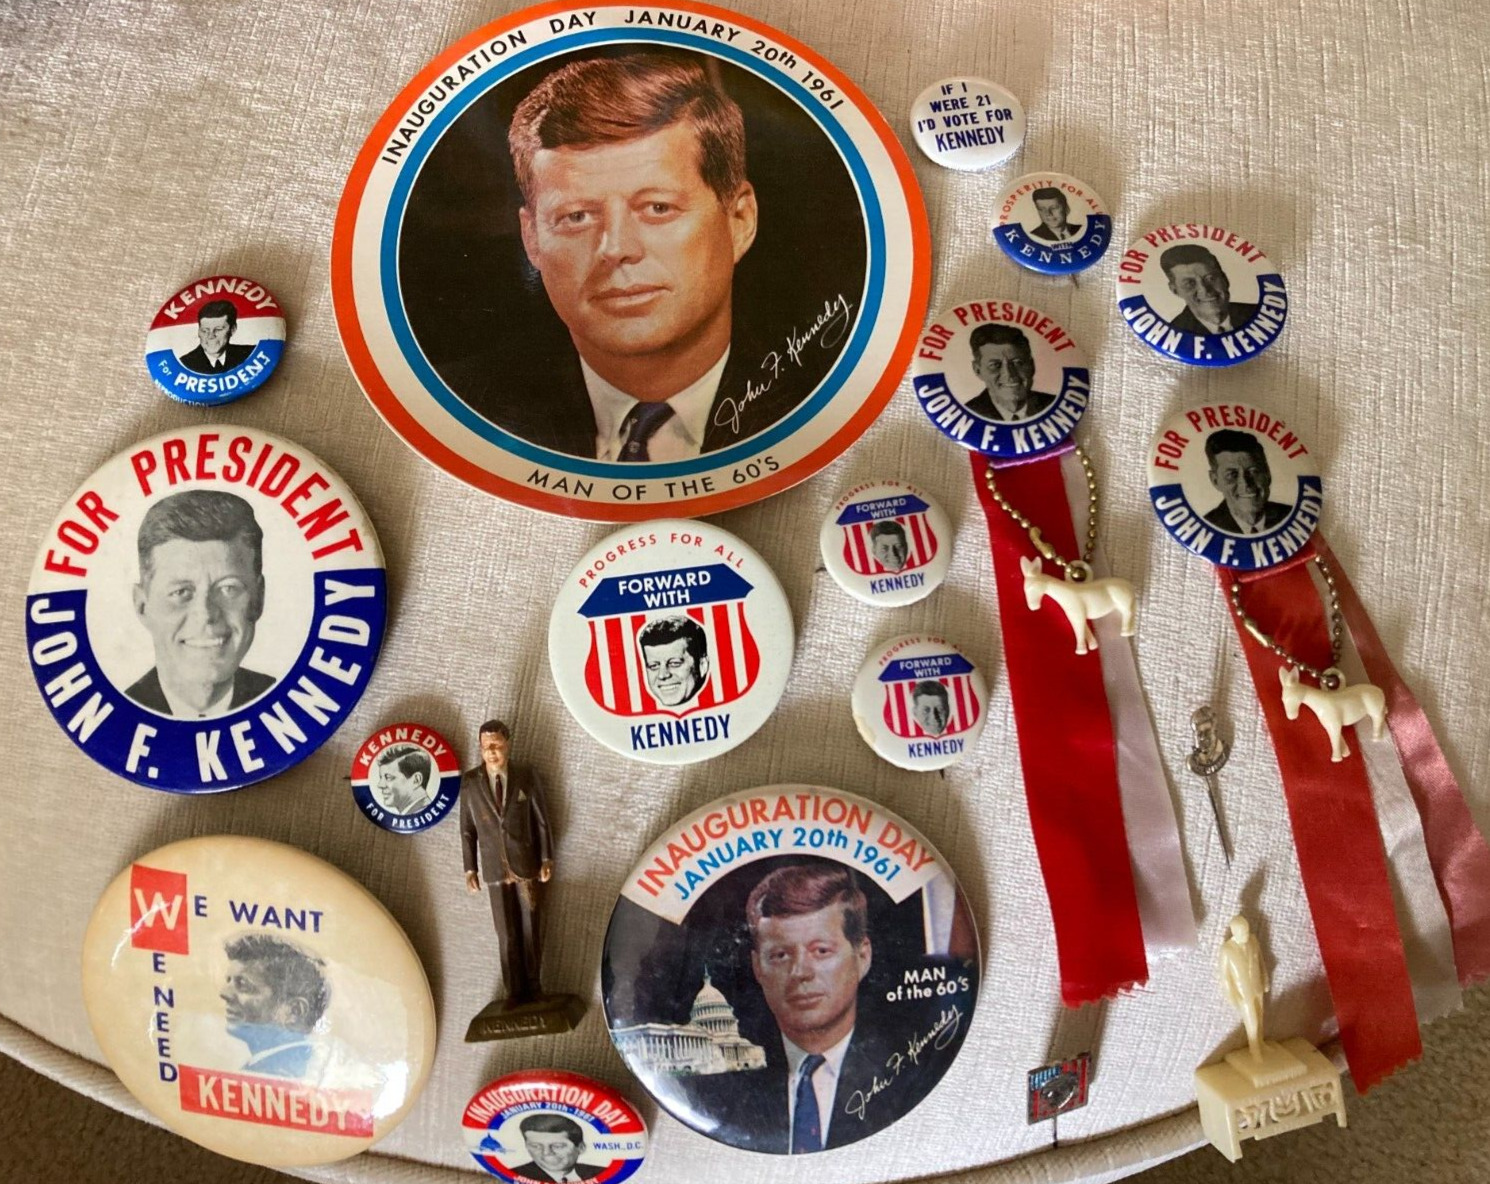 John F. Kennedy JFK for President 1960 Campaign Inauguration Pinback Buttons Lot